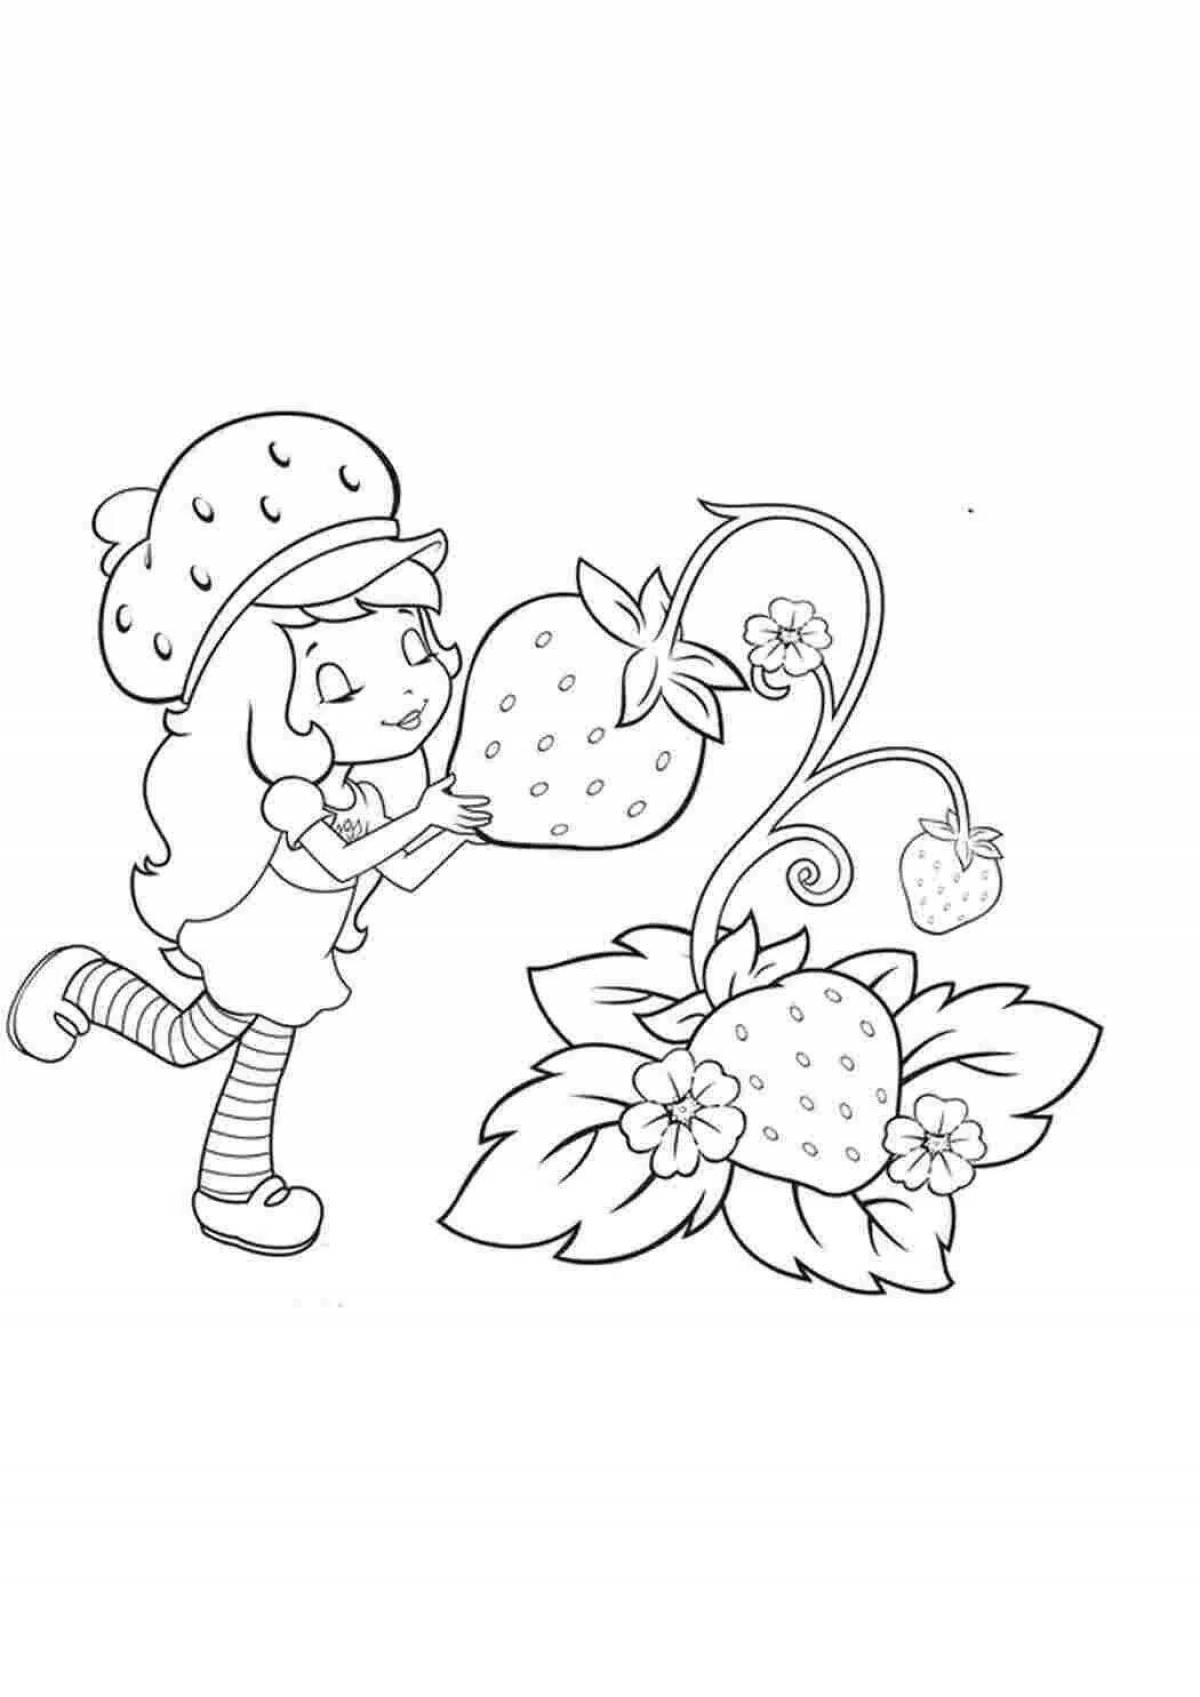 Playful strawberry coloring page